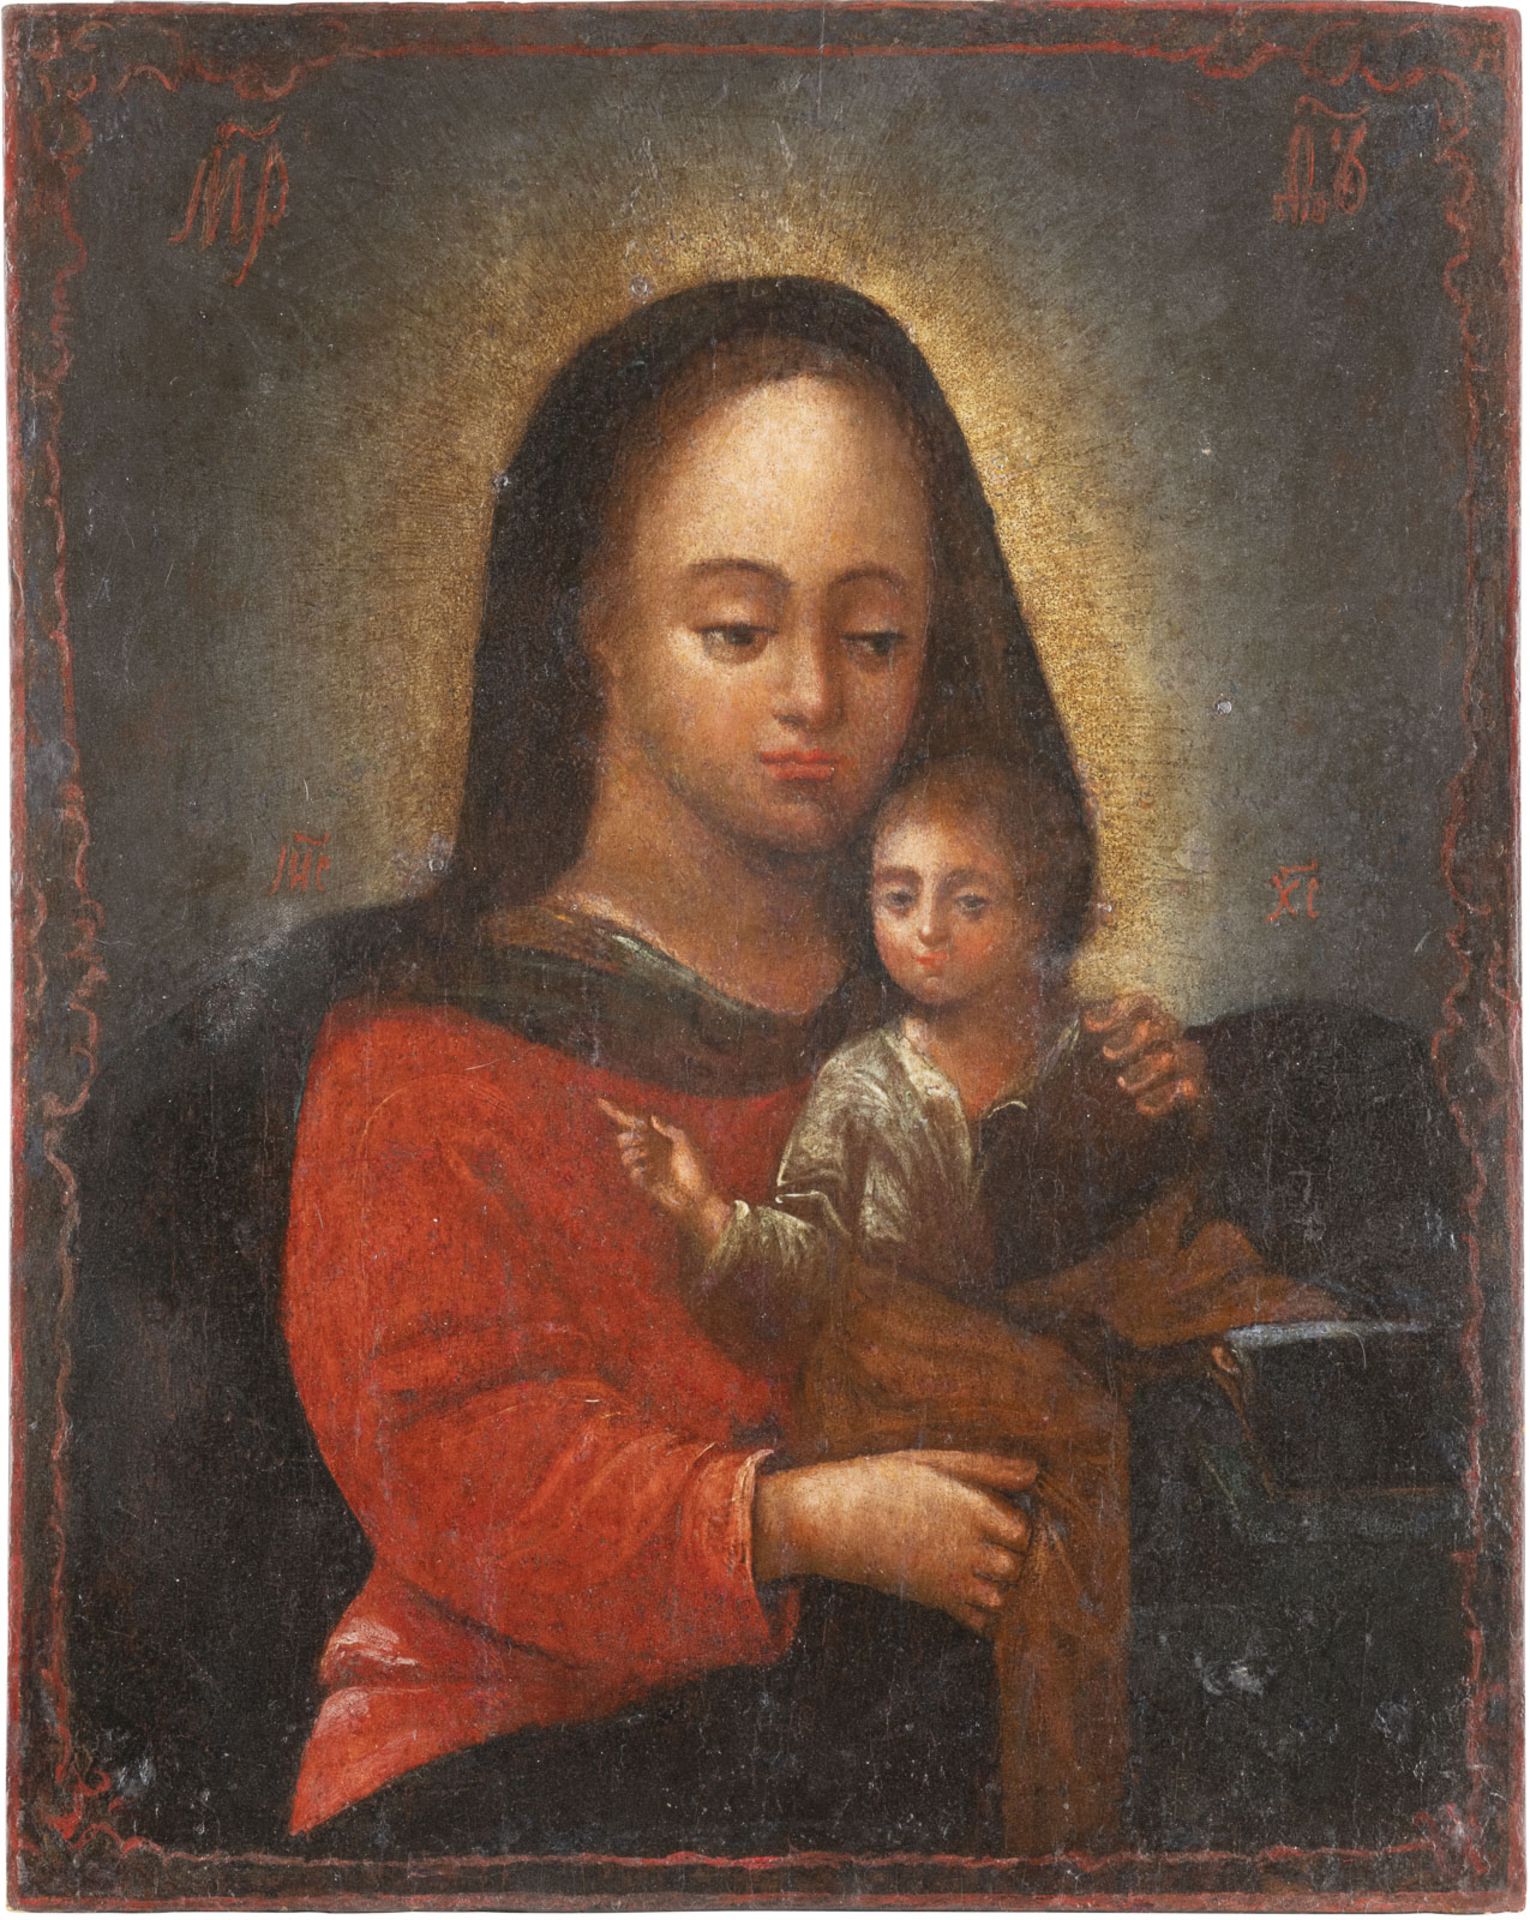 A RARE AND LARGE ICON SHOWING THE MOTHER OF GOD